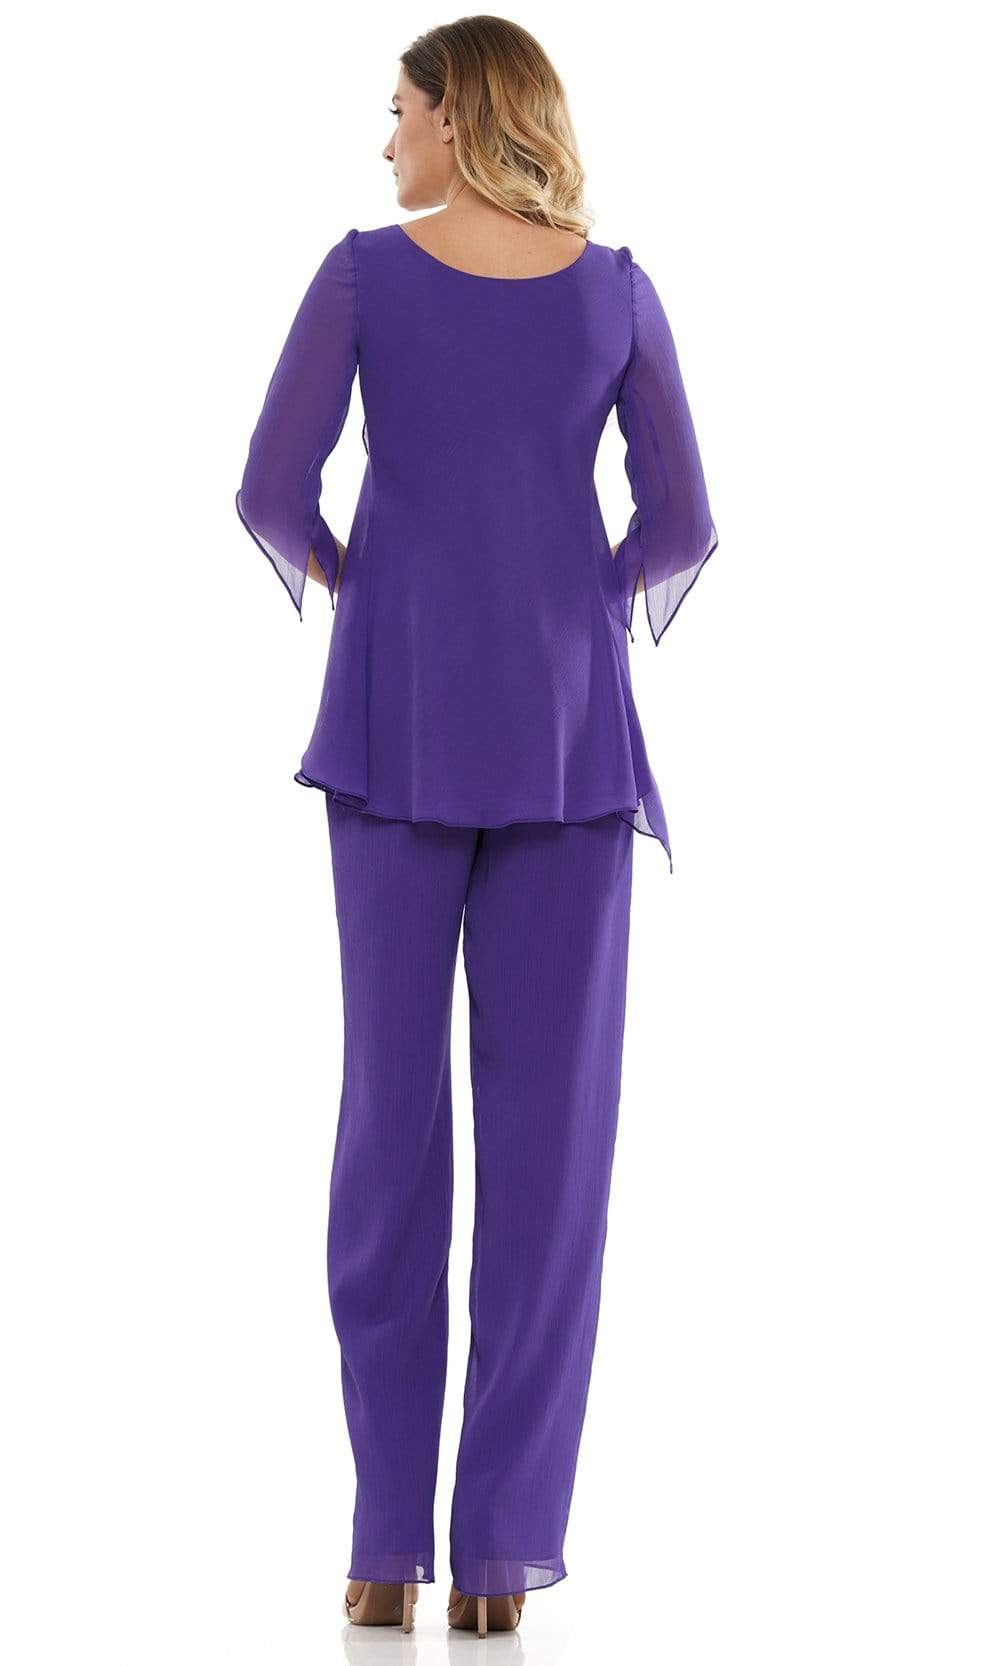 Marsoni by Colors - M308 V-Neck Half Sleeves Pantsuit Mother of the Bride Dresses